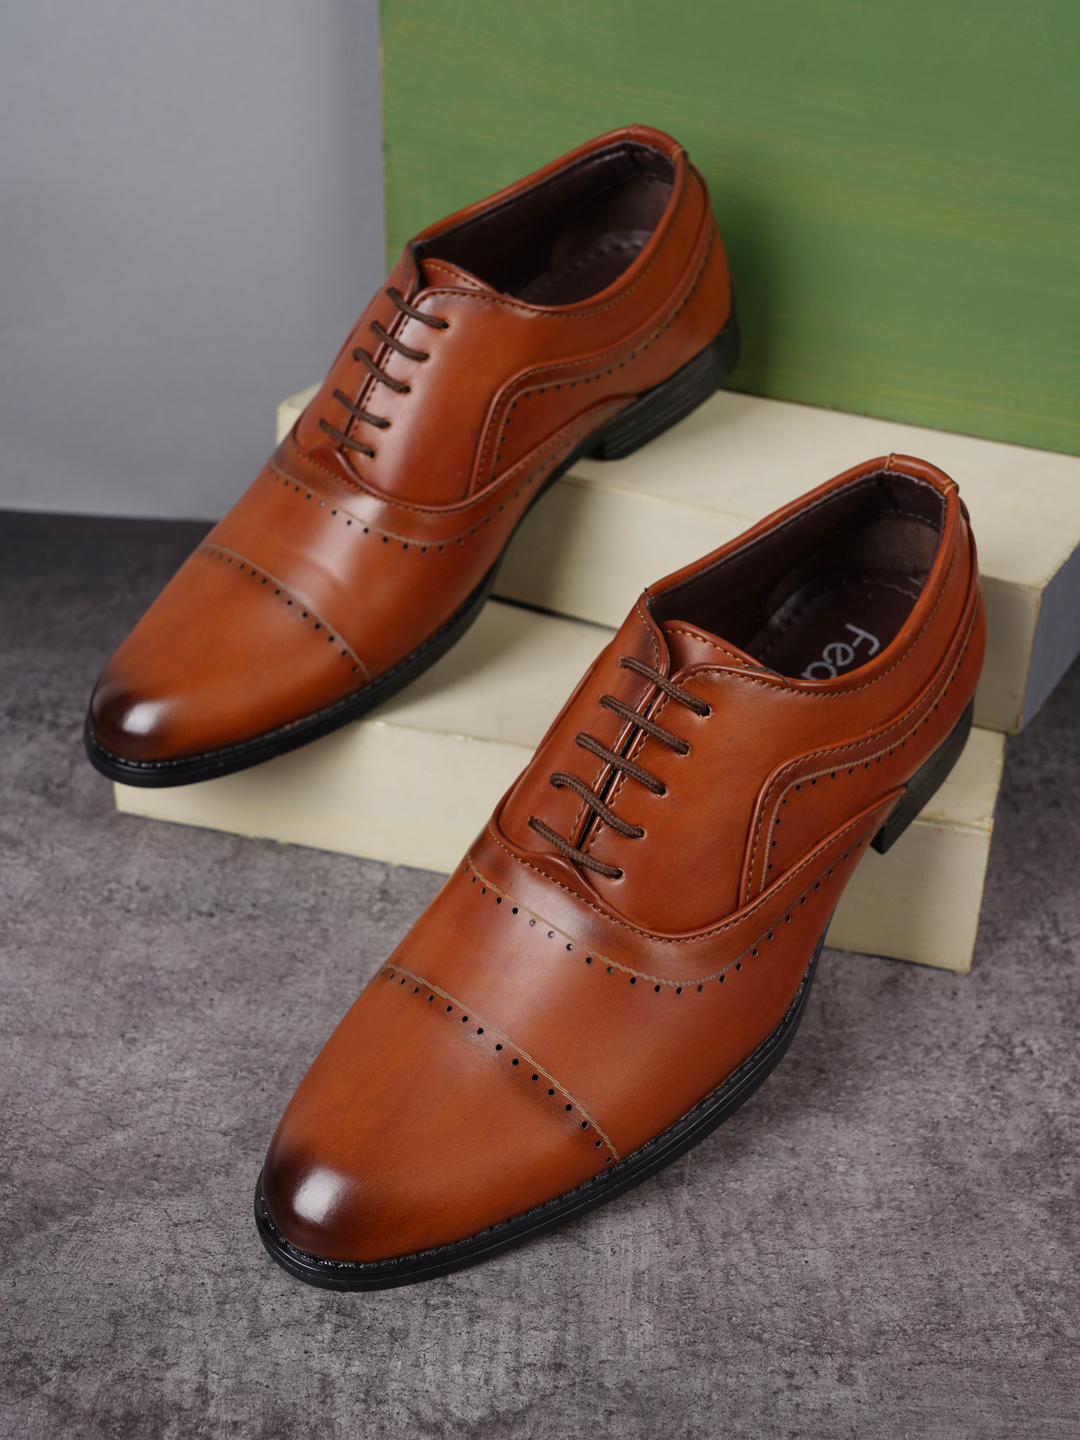 Style Shoes Lajpat Nagar | Home :: StyleShoes